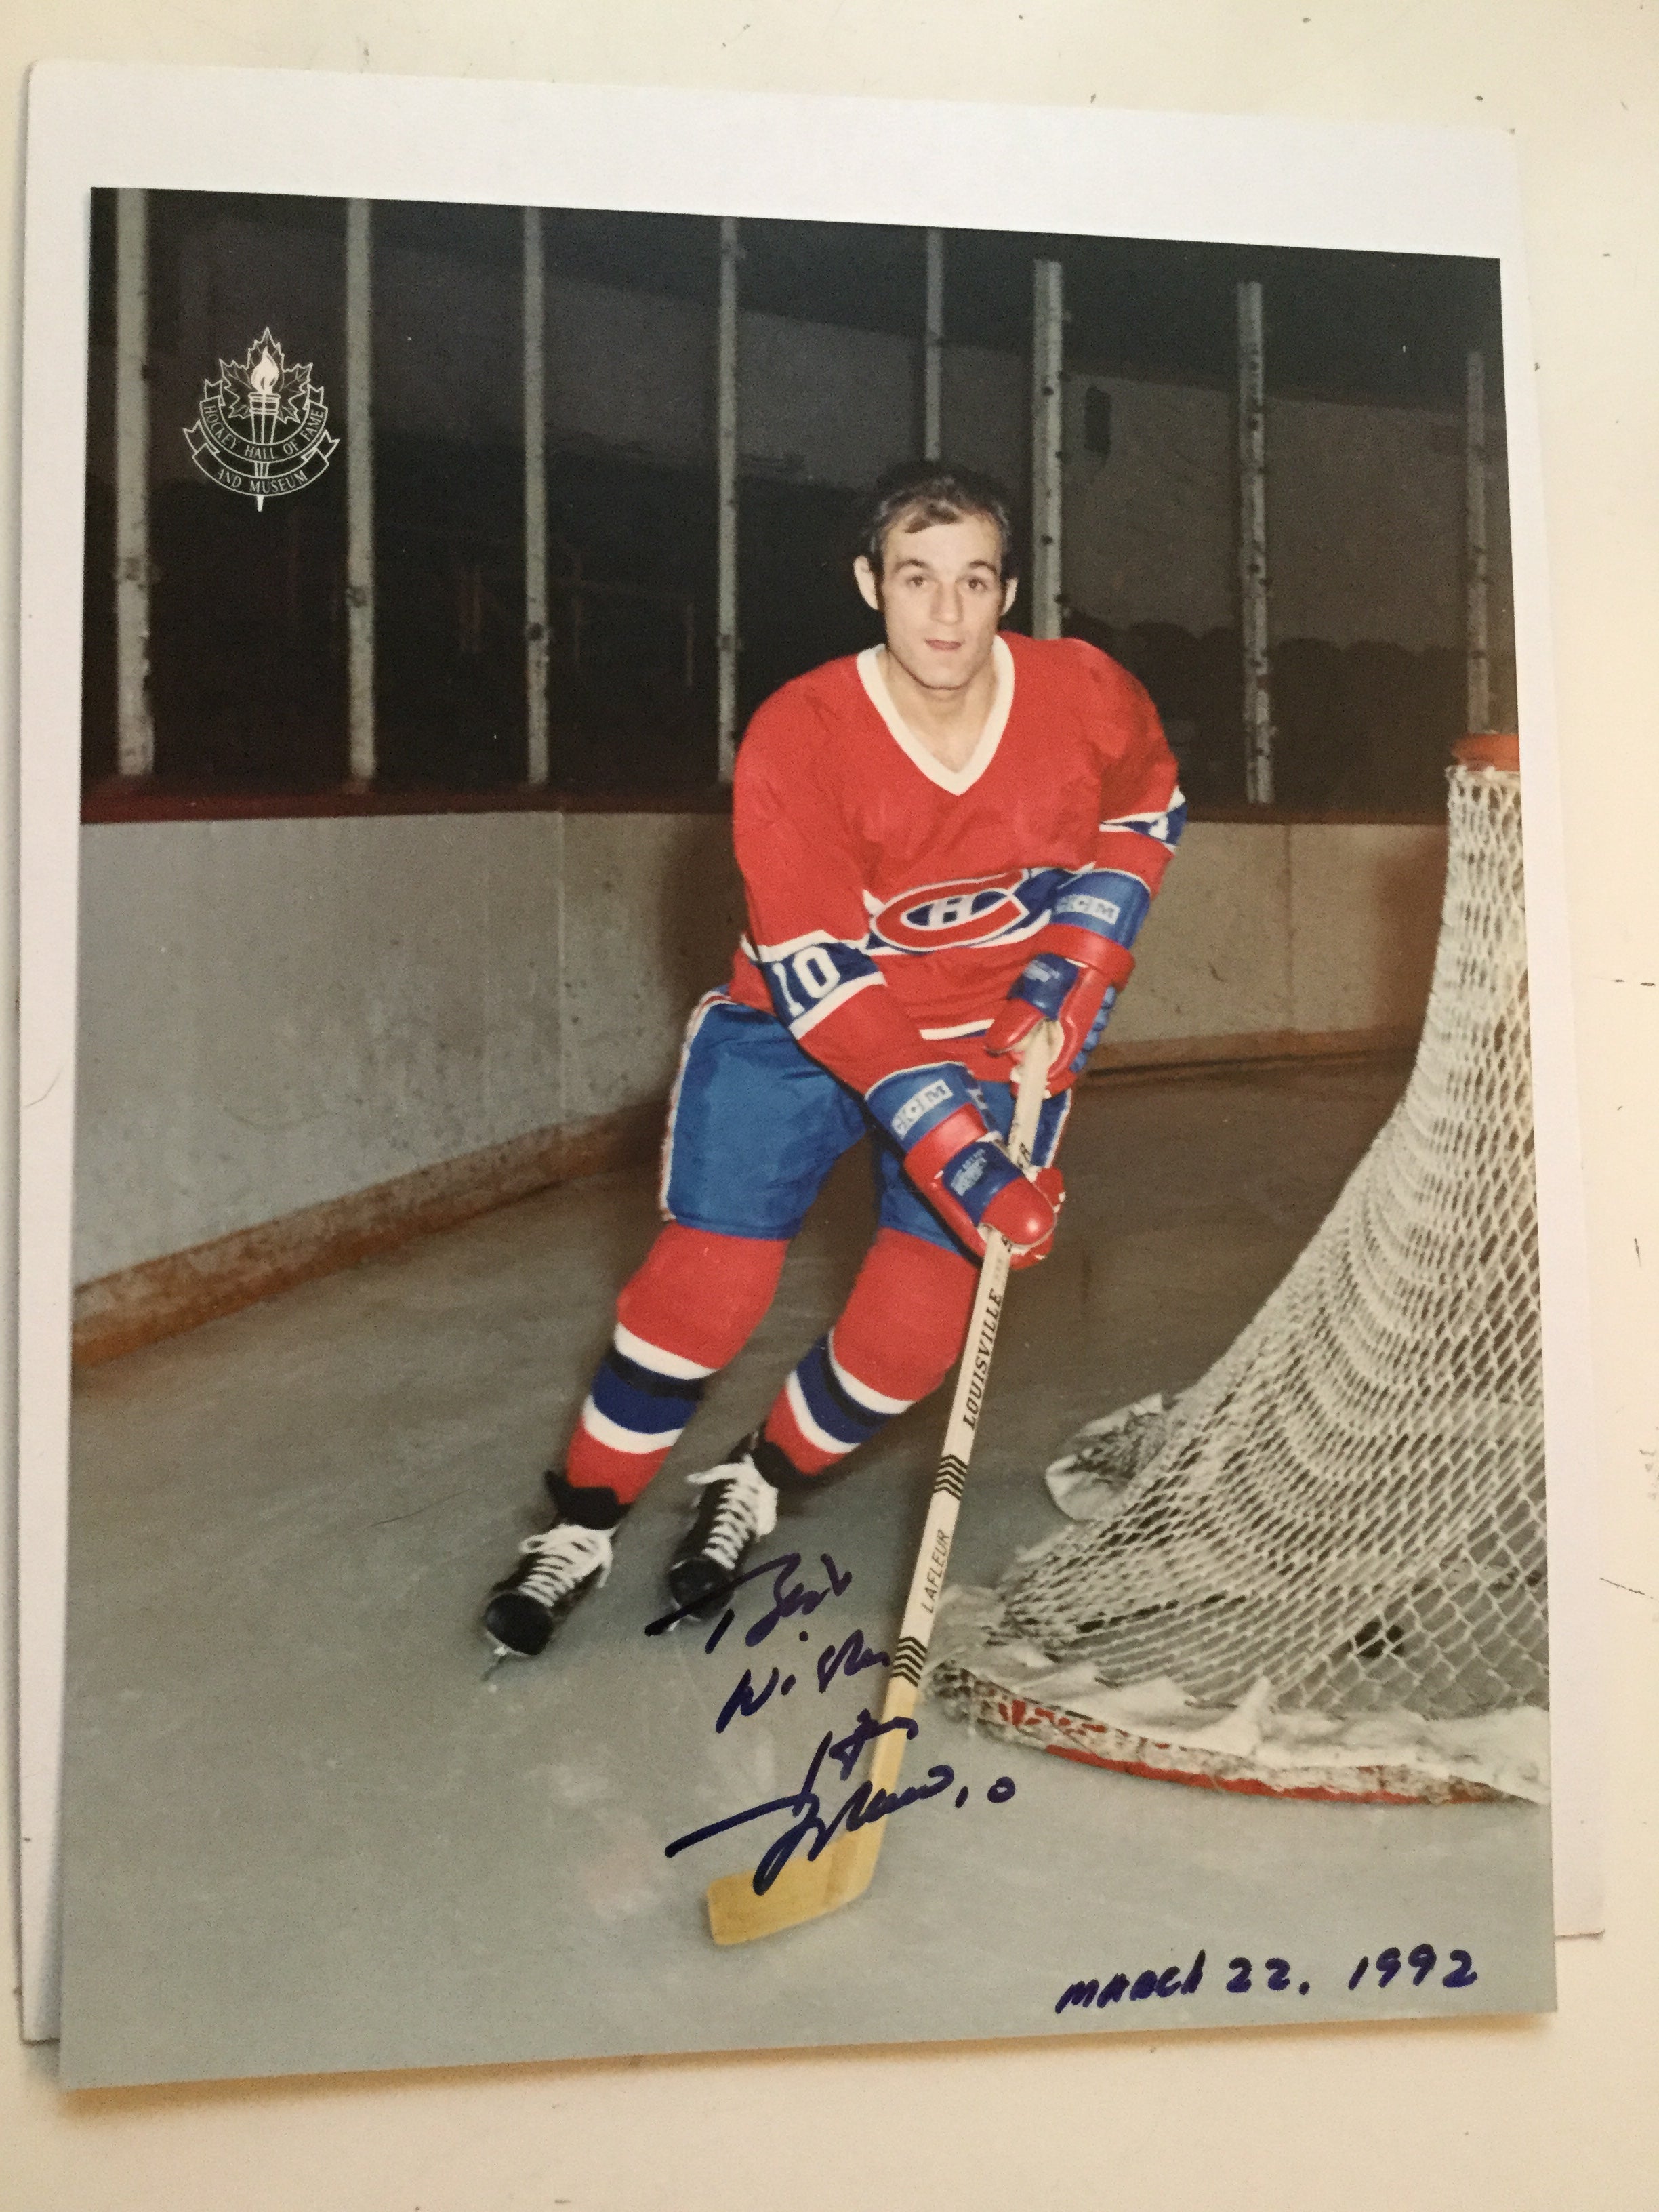 Guy LaFleur Montreal Canadiens hockey legend signed photo 1992 with COA